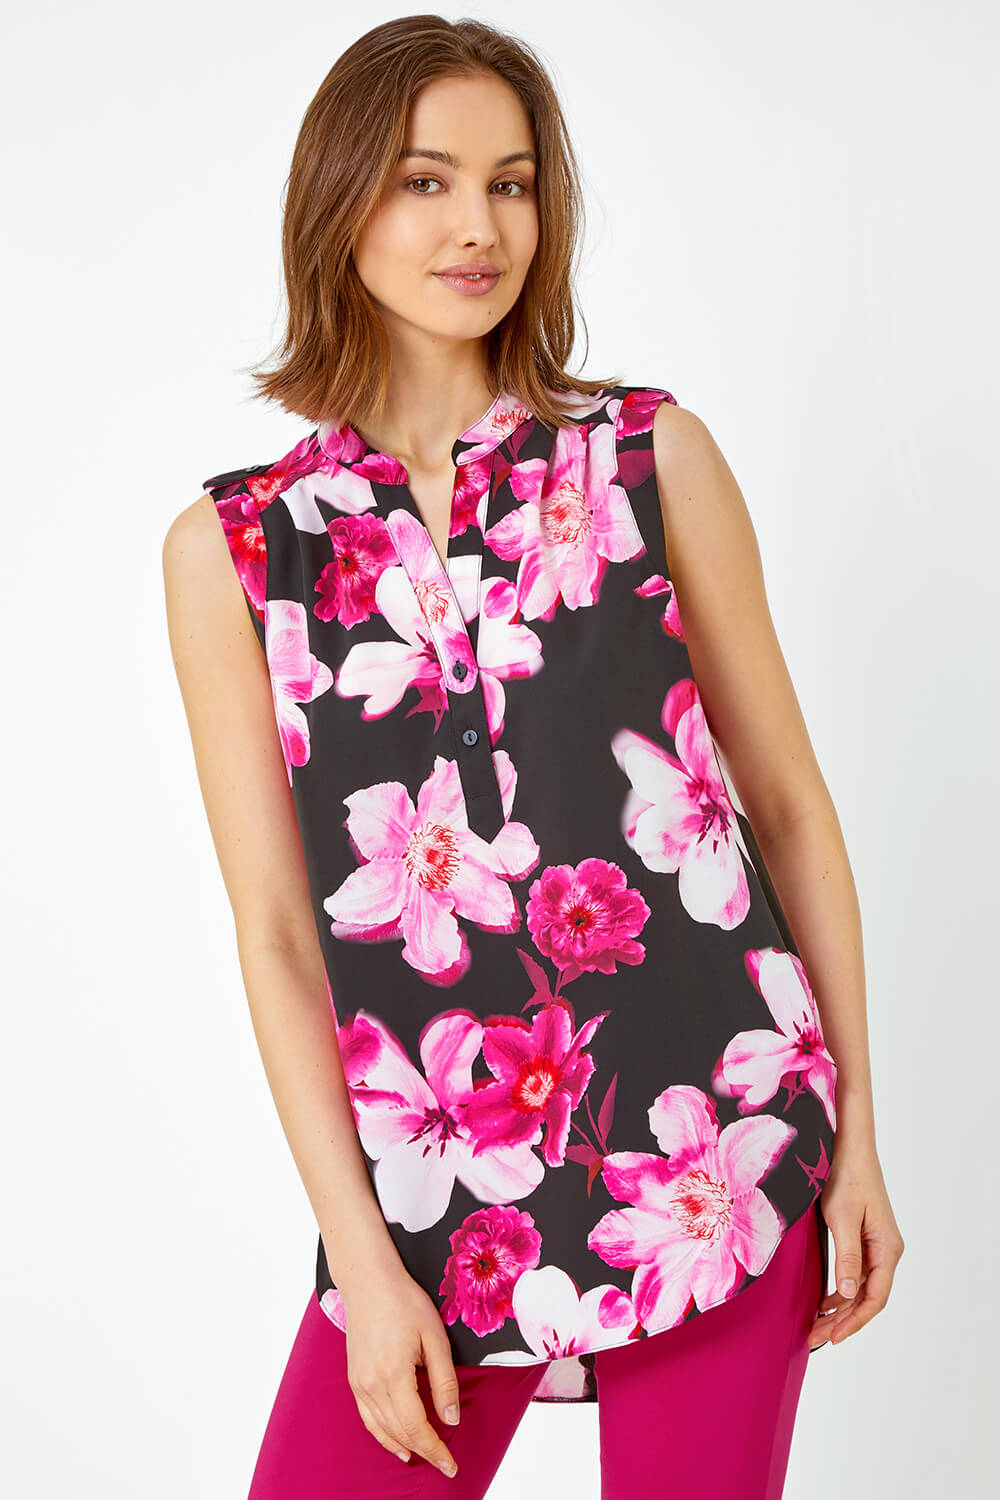 CERISE Sleeveless Floral Print Tunic Top, Image 4 of 5